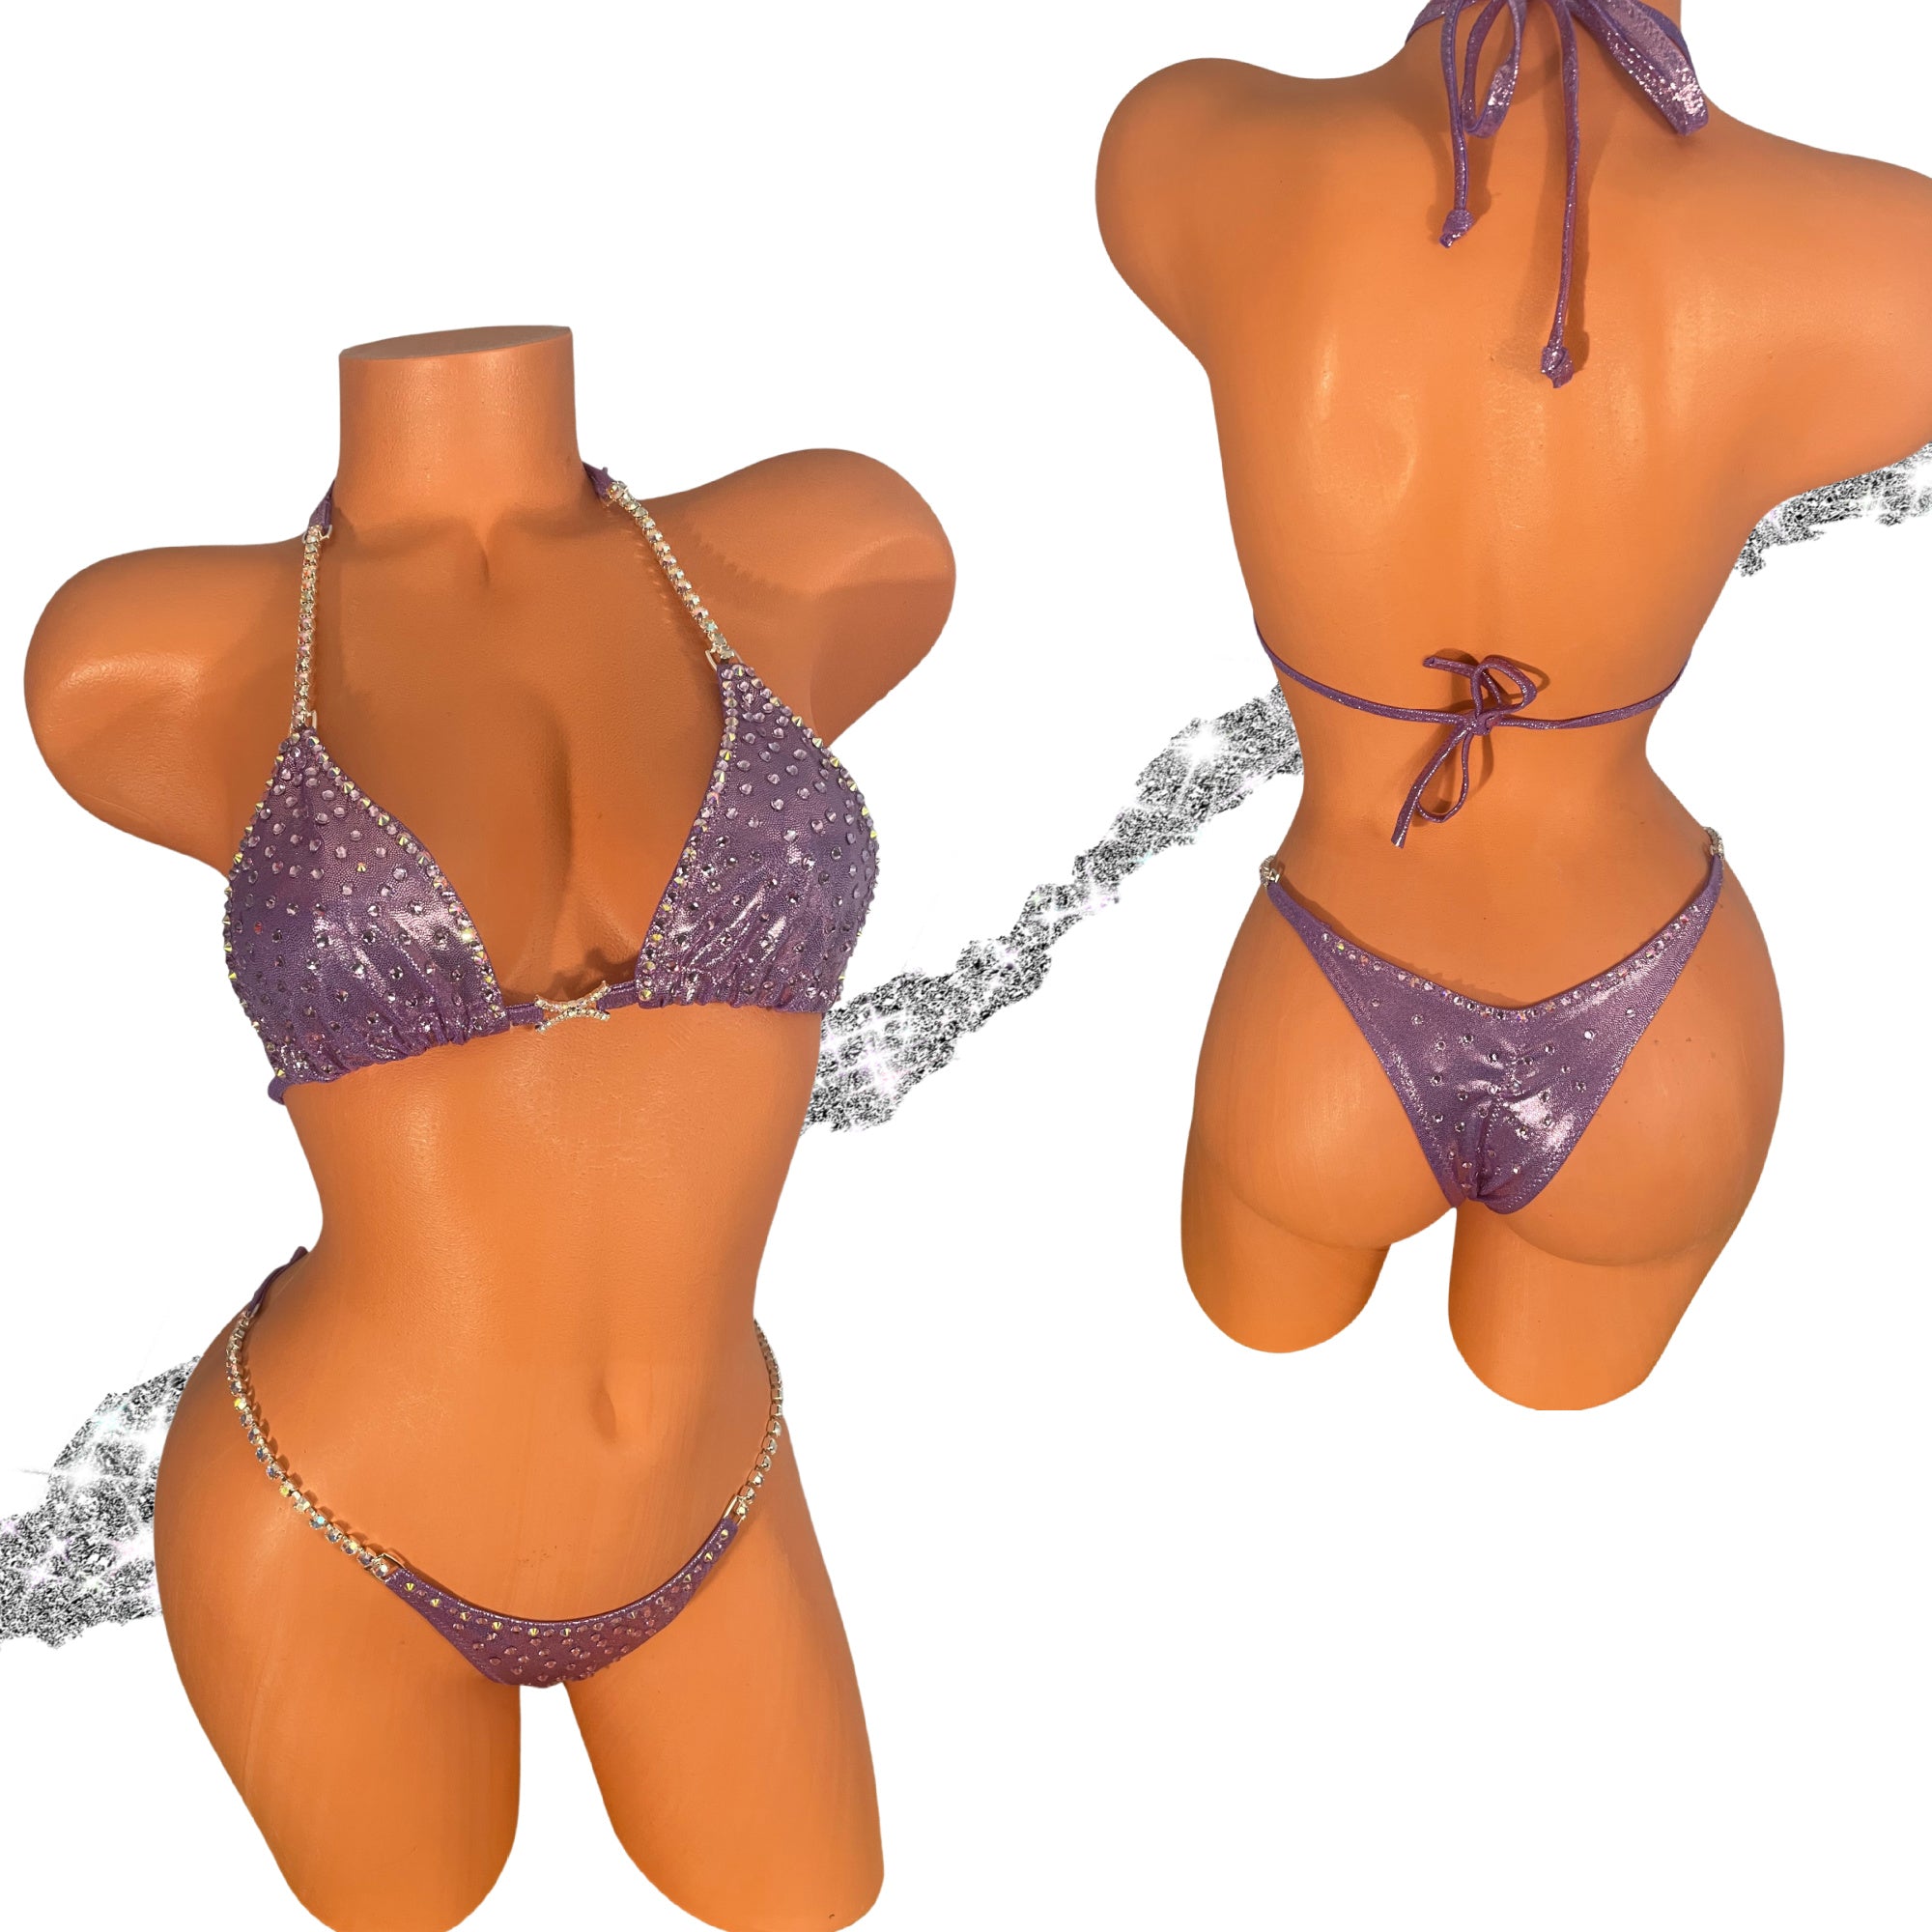 Violet AB and violet Crystal Competition Bikini